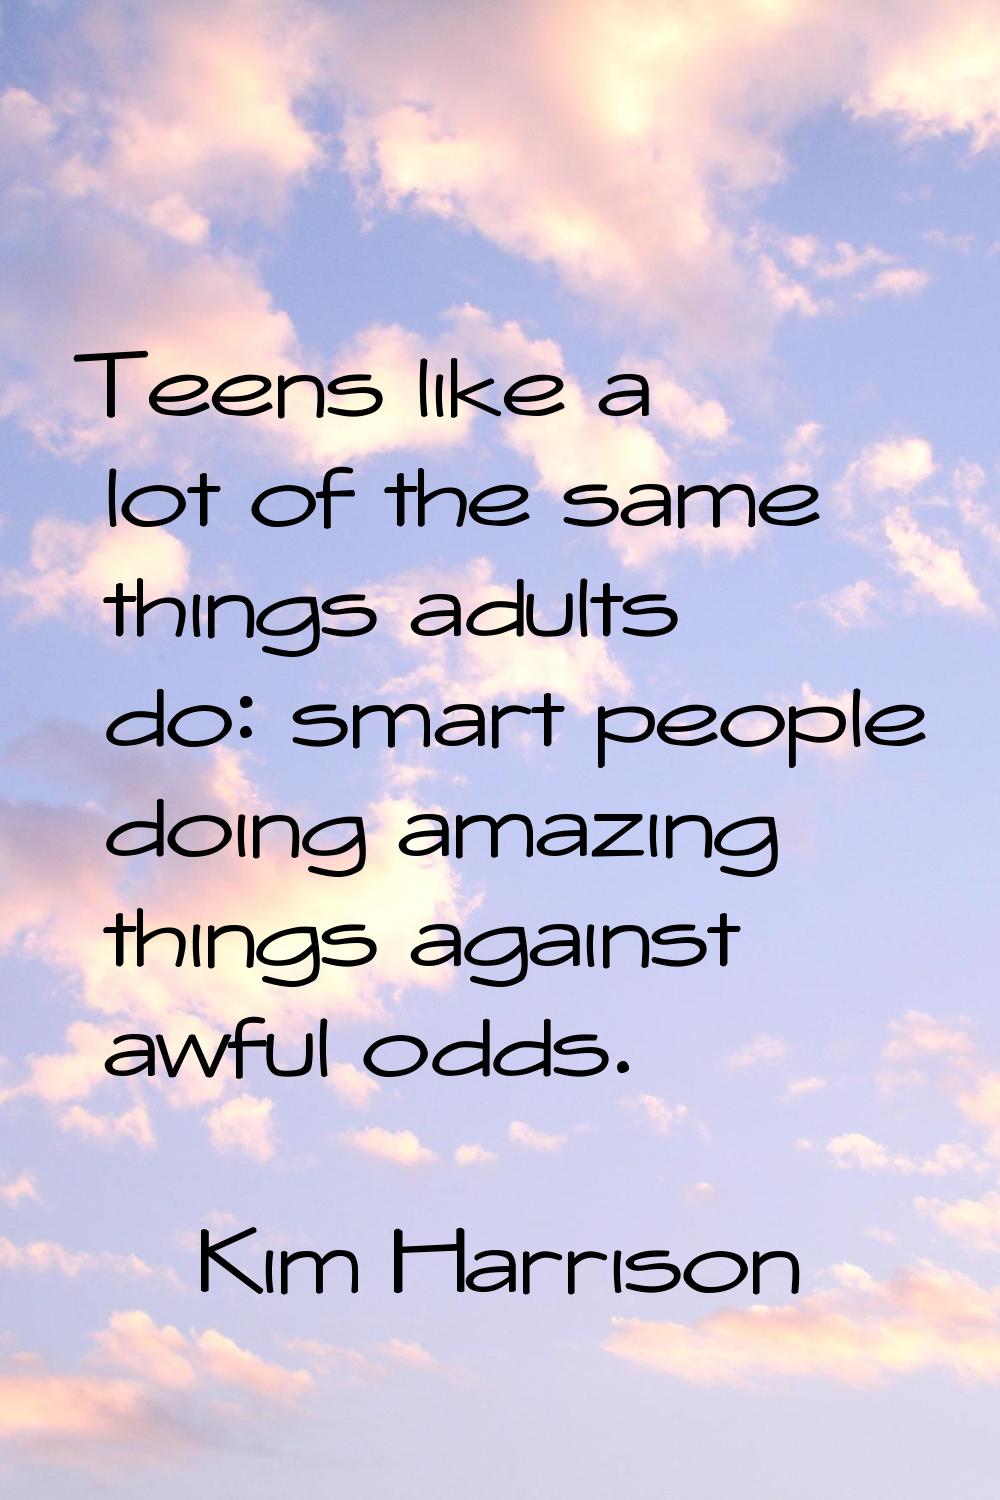 Teens like a lot of the same things adults do: smart people doing amazing things against awful odds